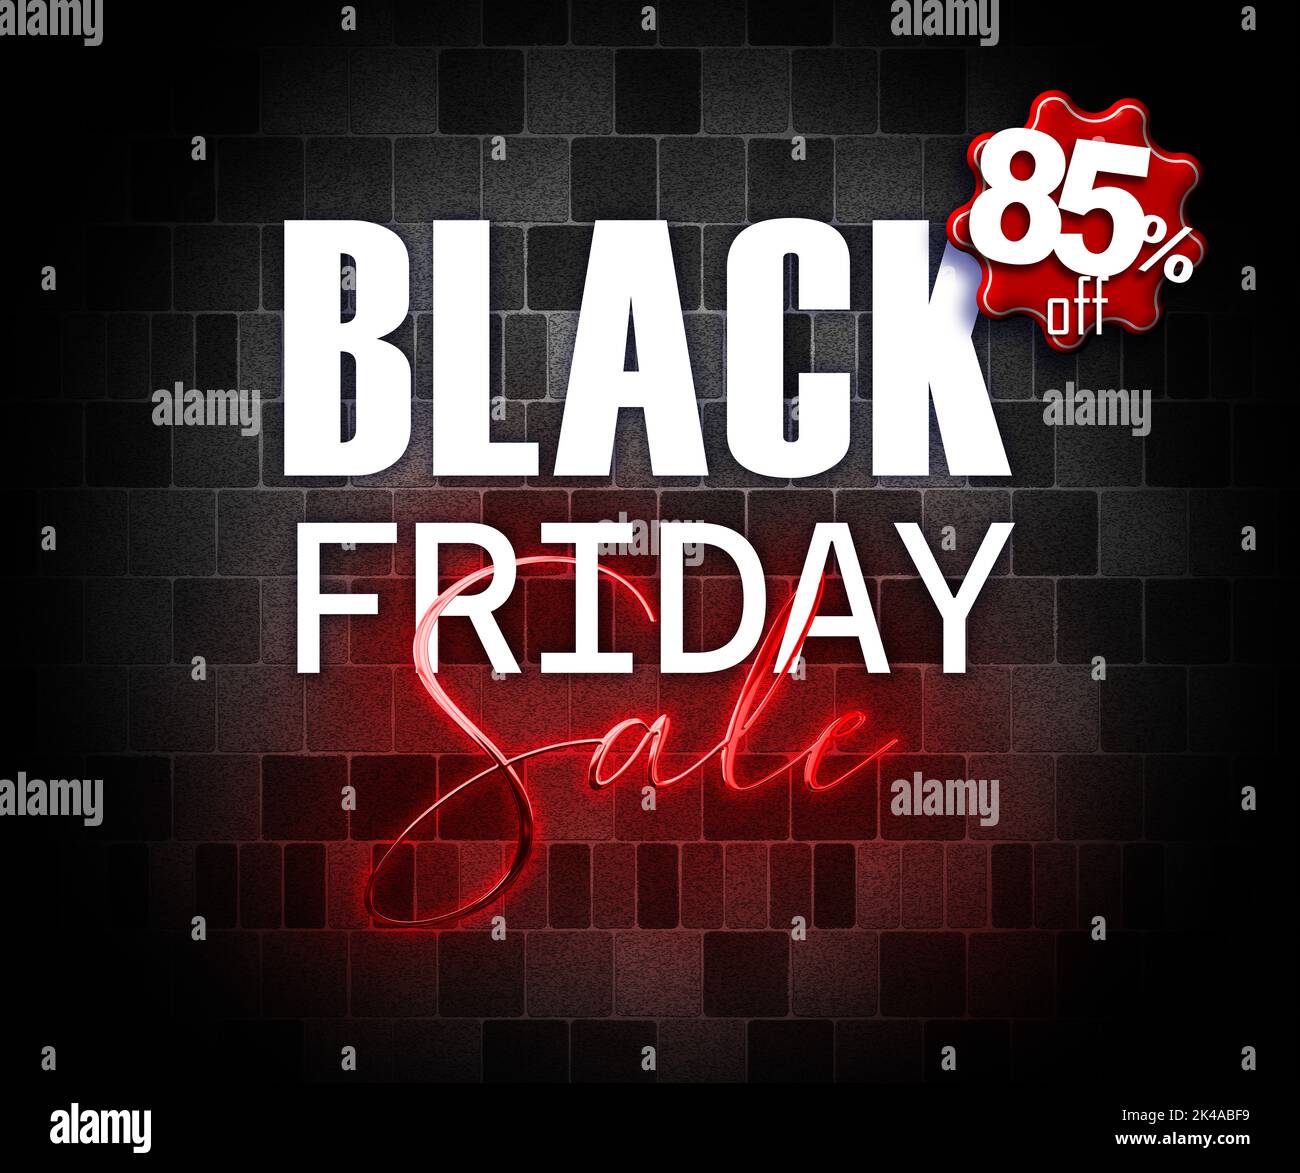 illustration with 3d elements black friday promotion banner 85 percent off sales increase Stock Photo